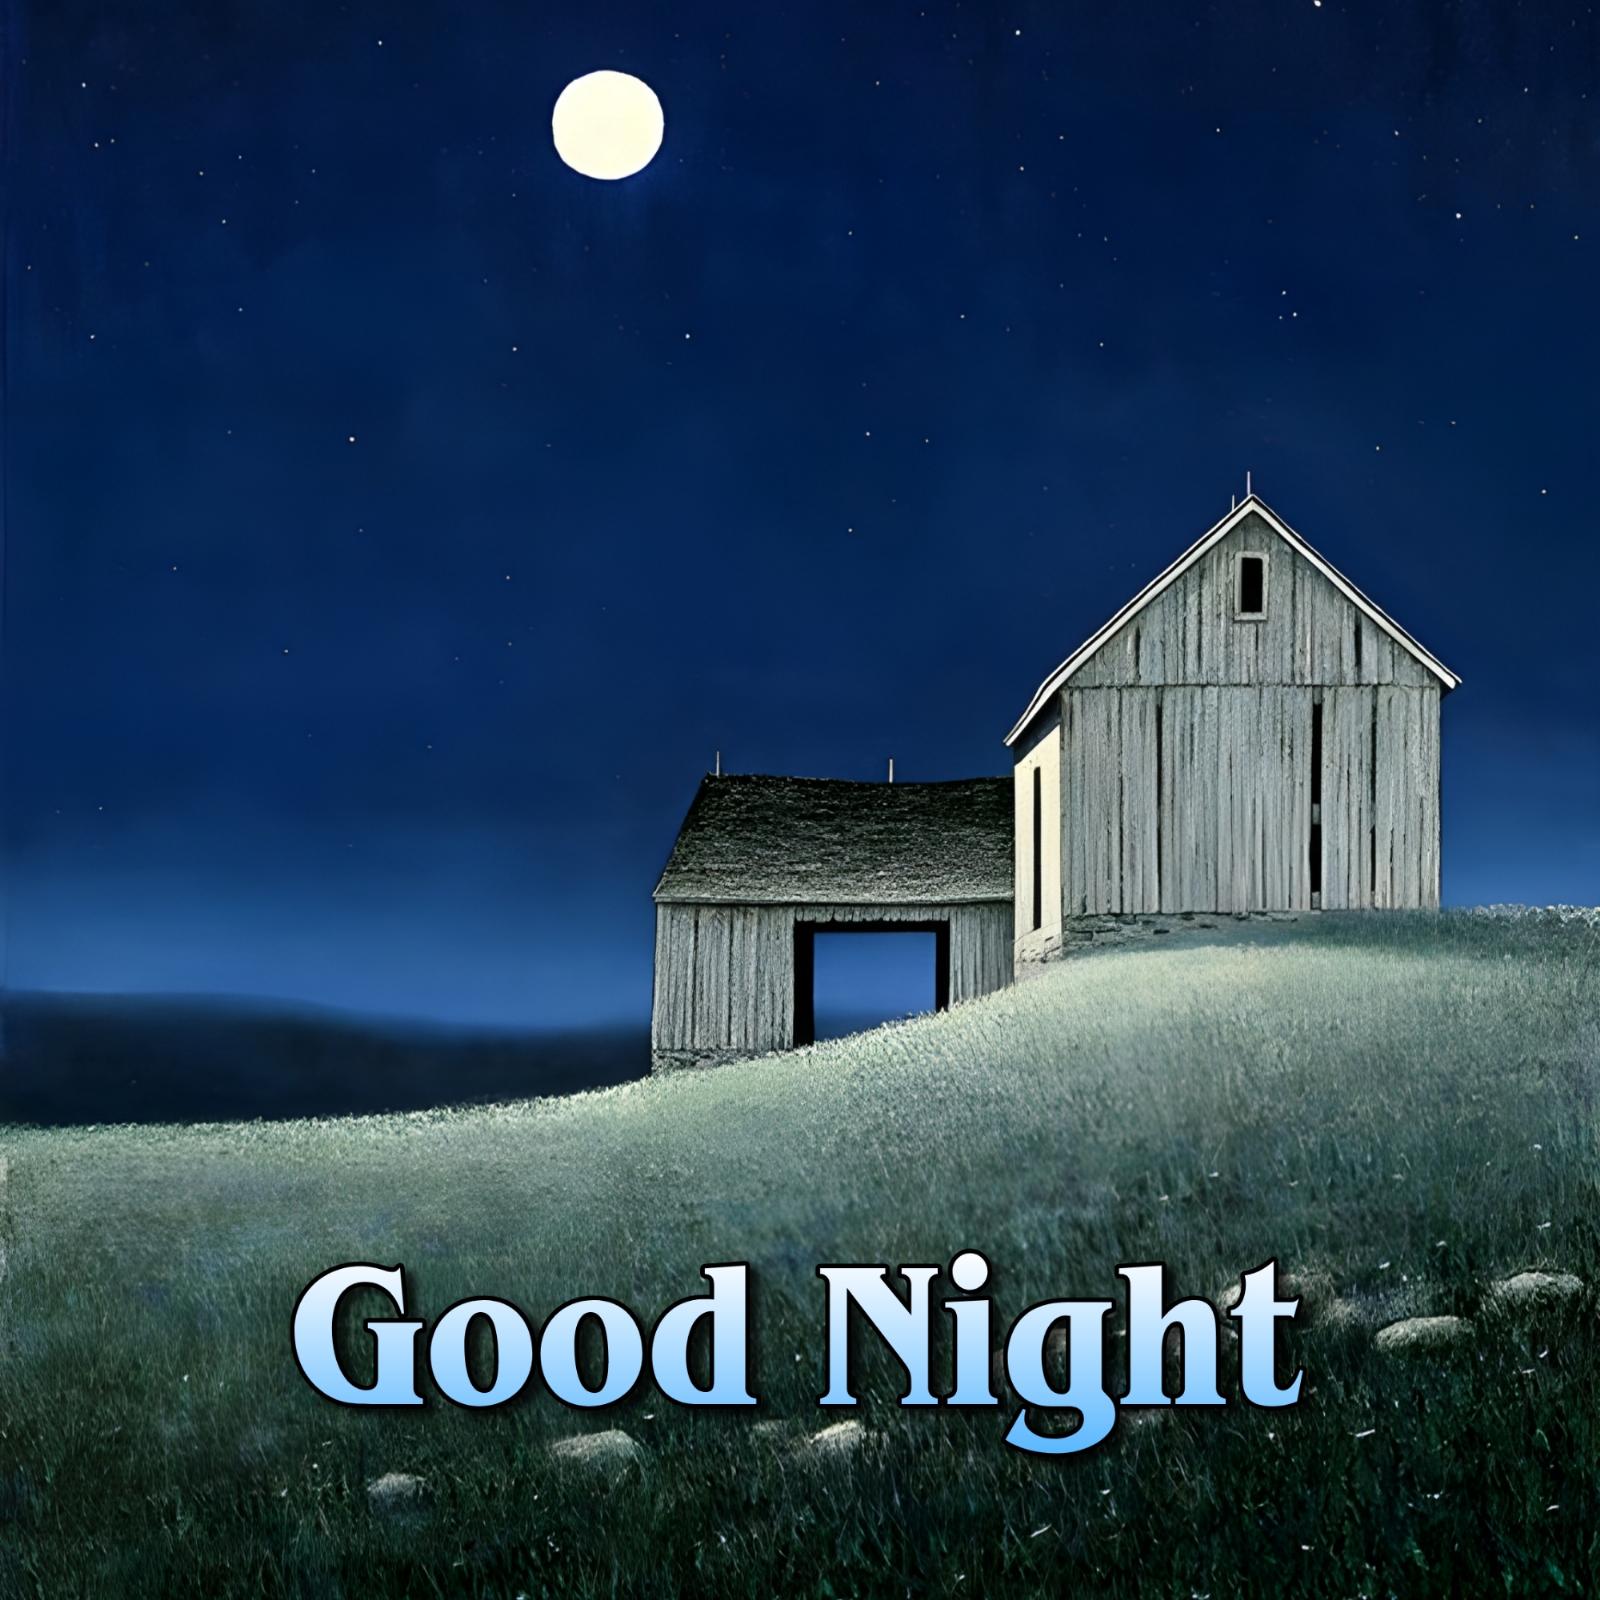 Good Night Moon Light Old House Images